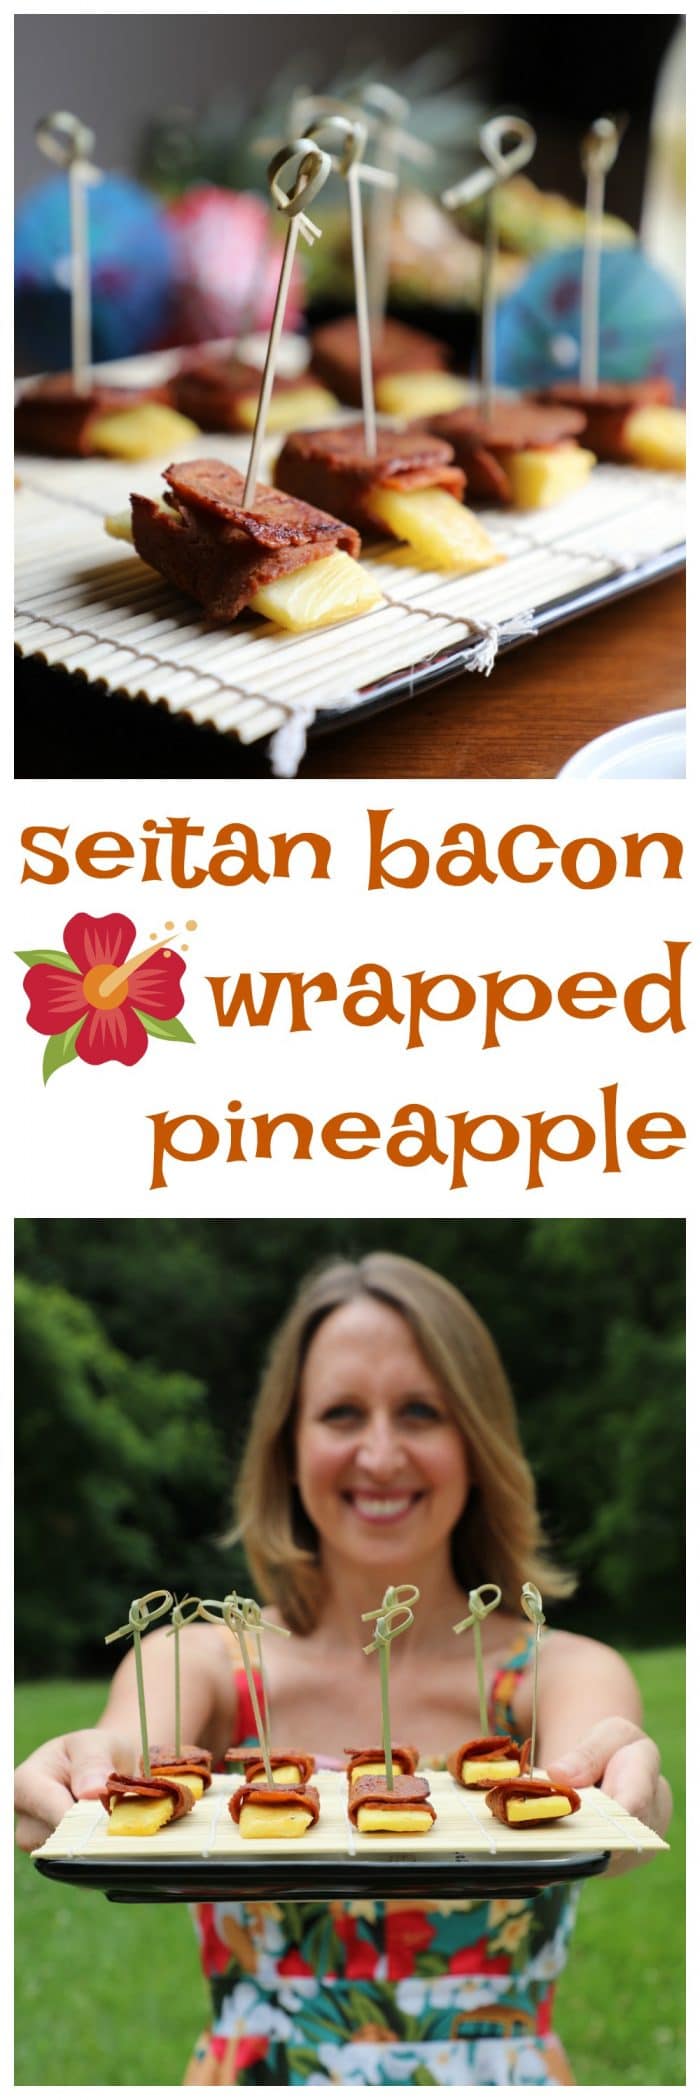 Seitan bacon wrapped pineapple on bamboo covered plate. Cadry holding platter of appetizers.